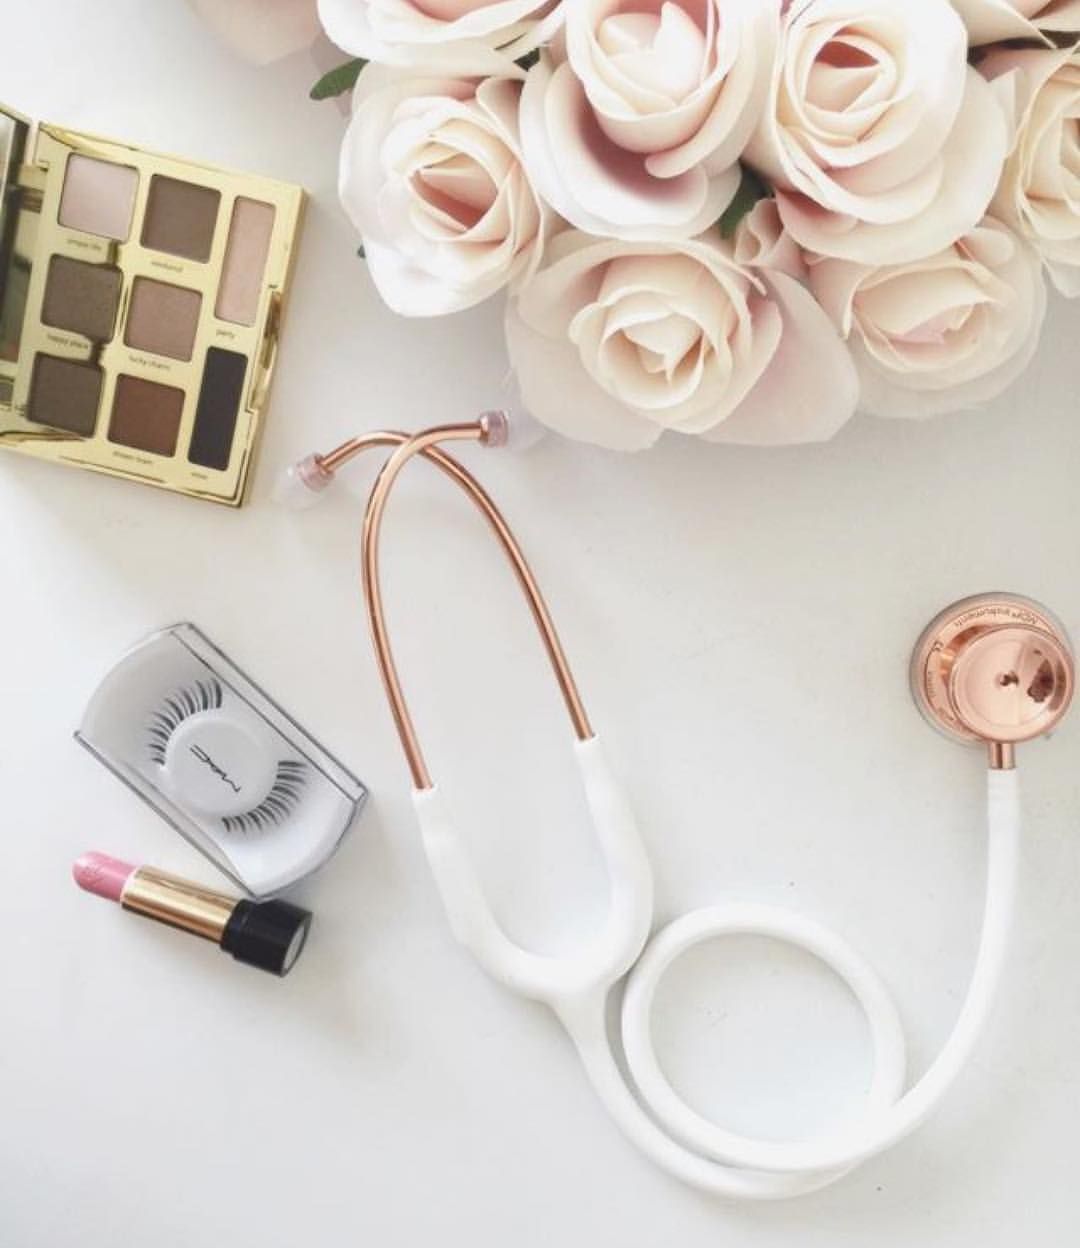 A rose gold stethoscope surrounded by makeup and flowers - Nurse